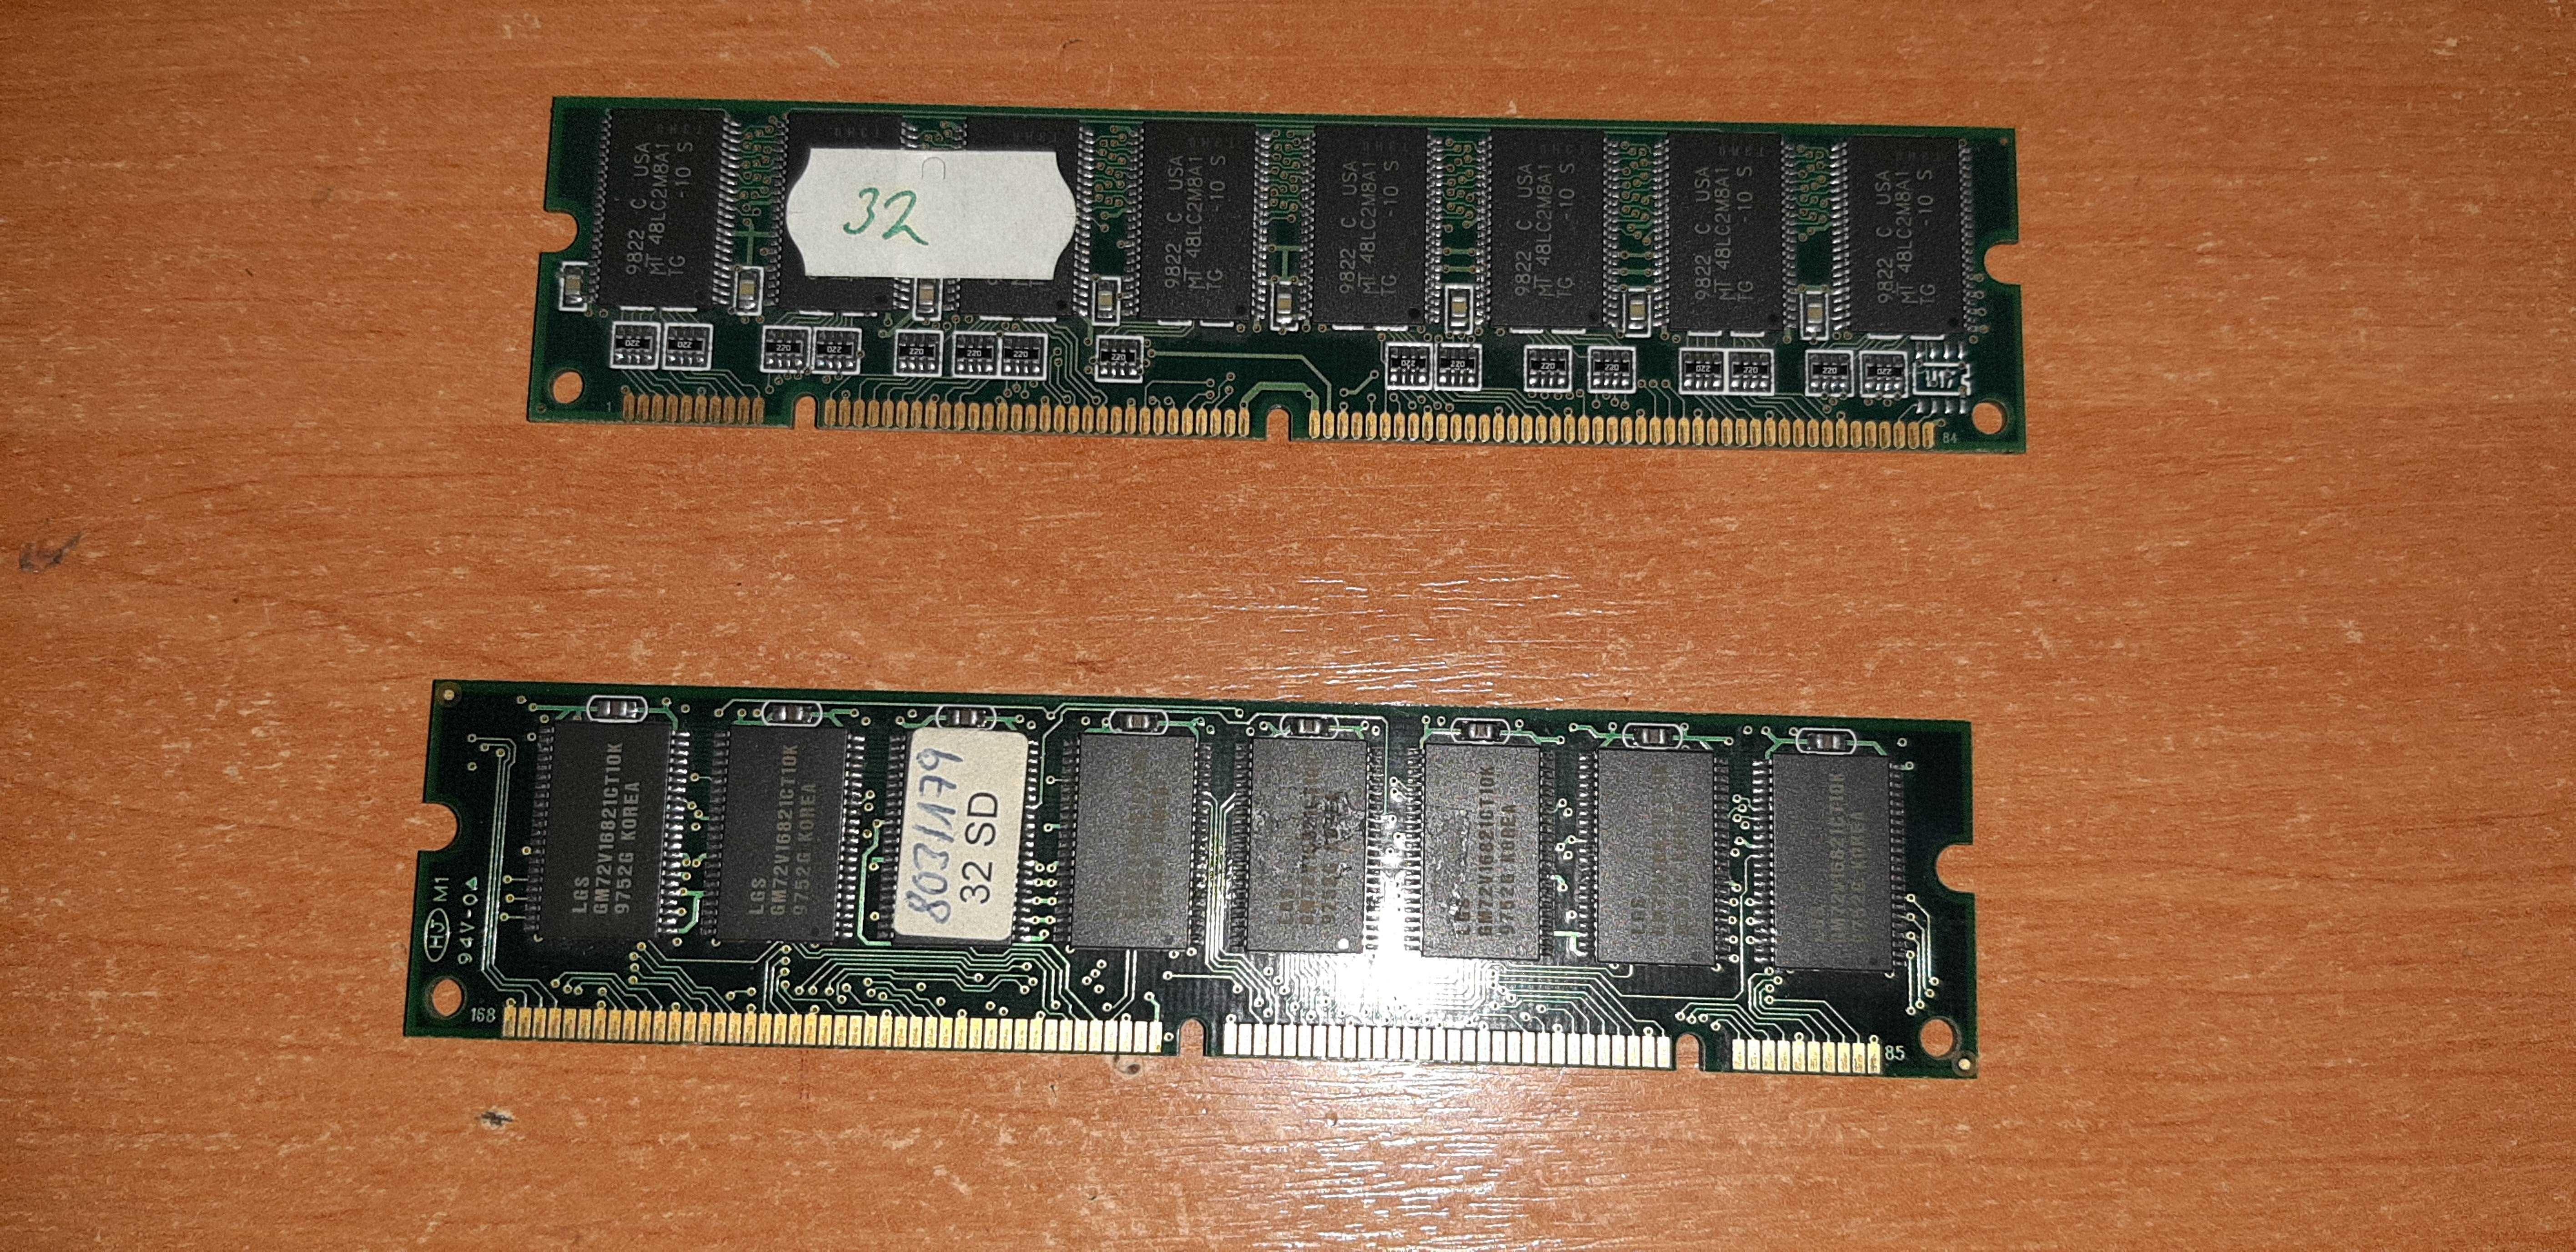 OLD стара оперативна память озу до ПК SD 32 DIMM Memory made in usa!!!